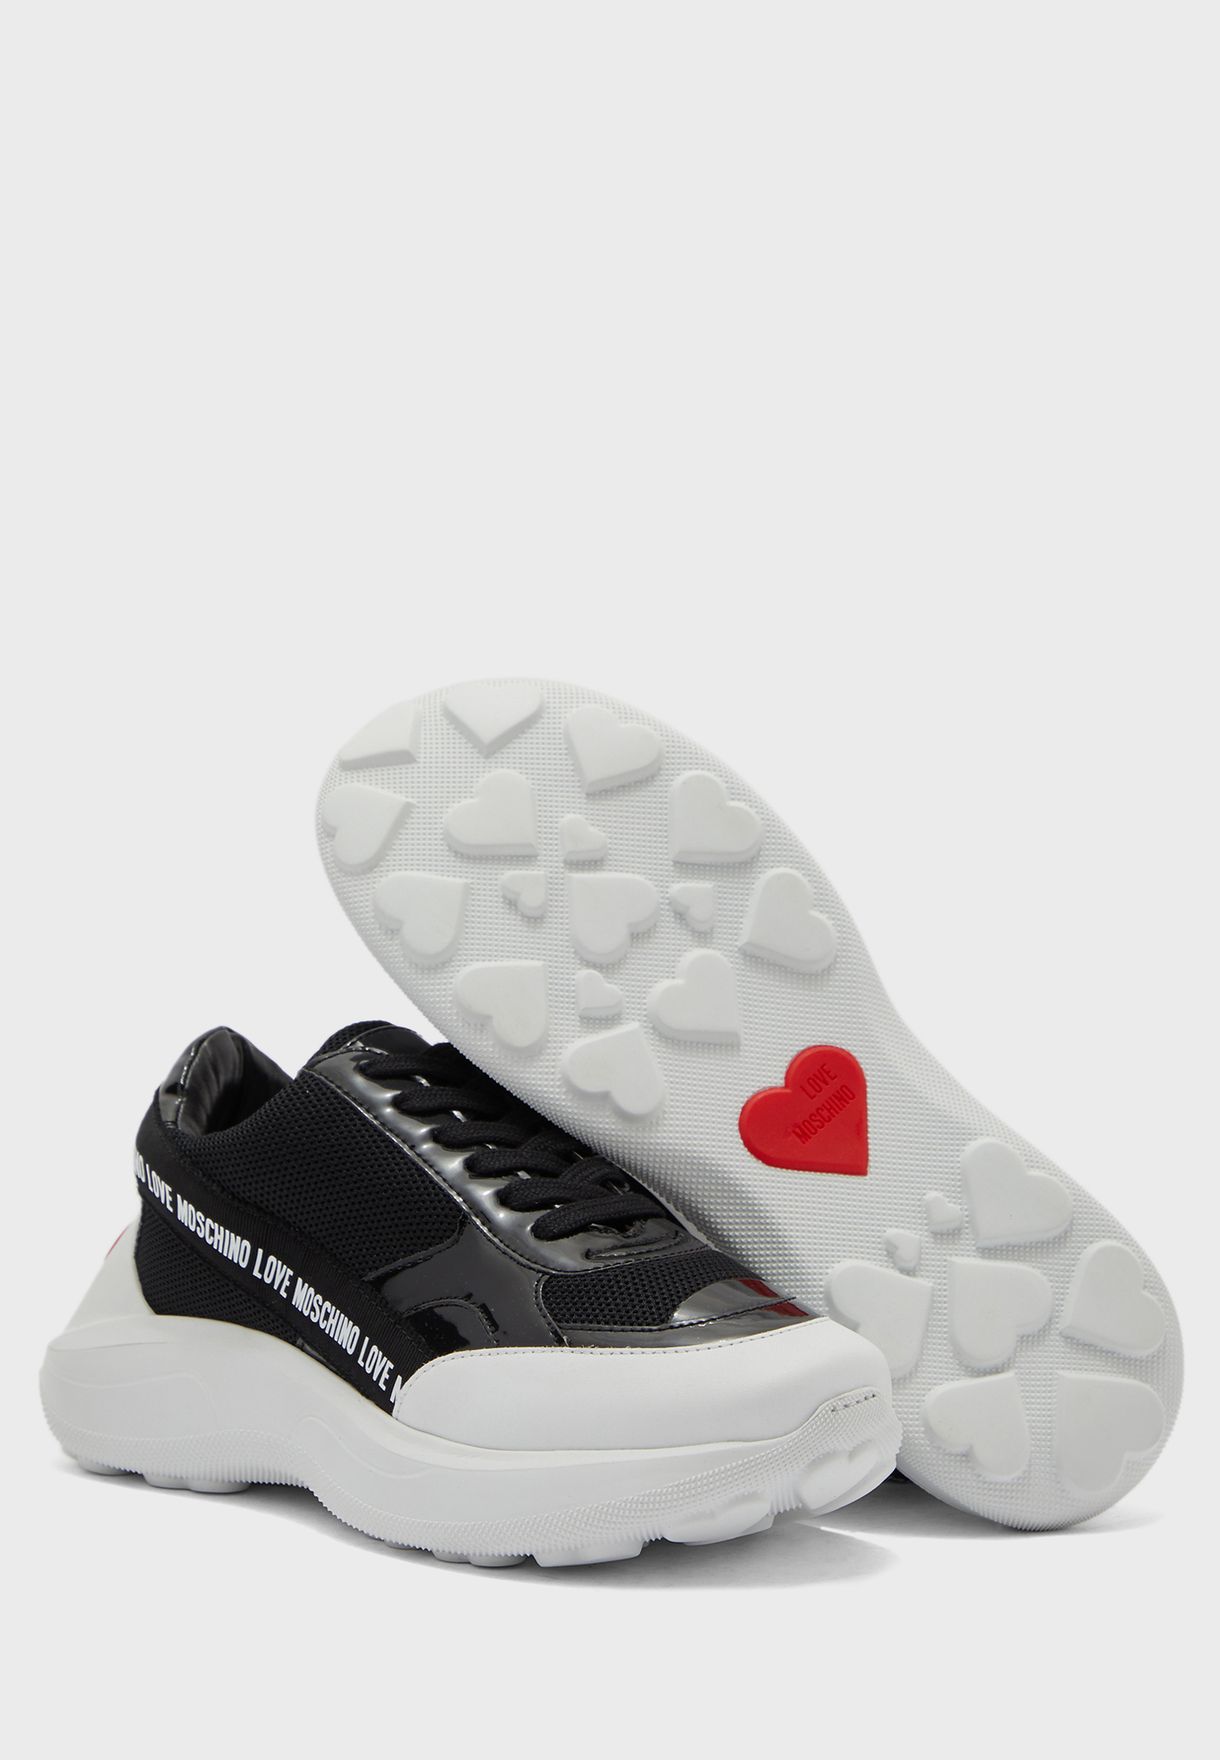 love moschino sneaker low